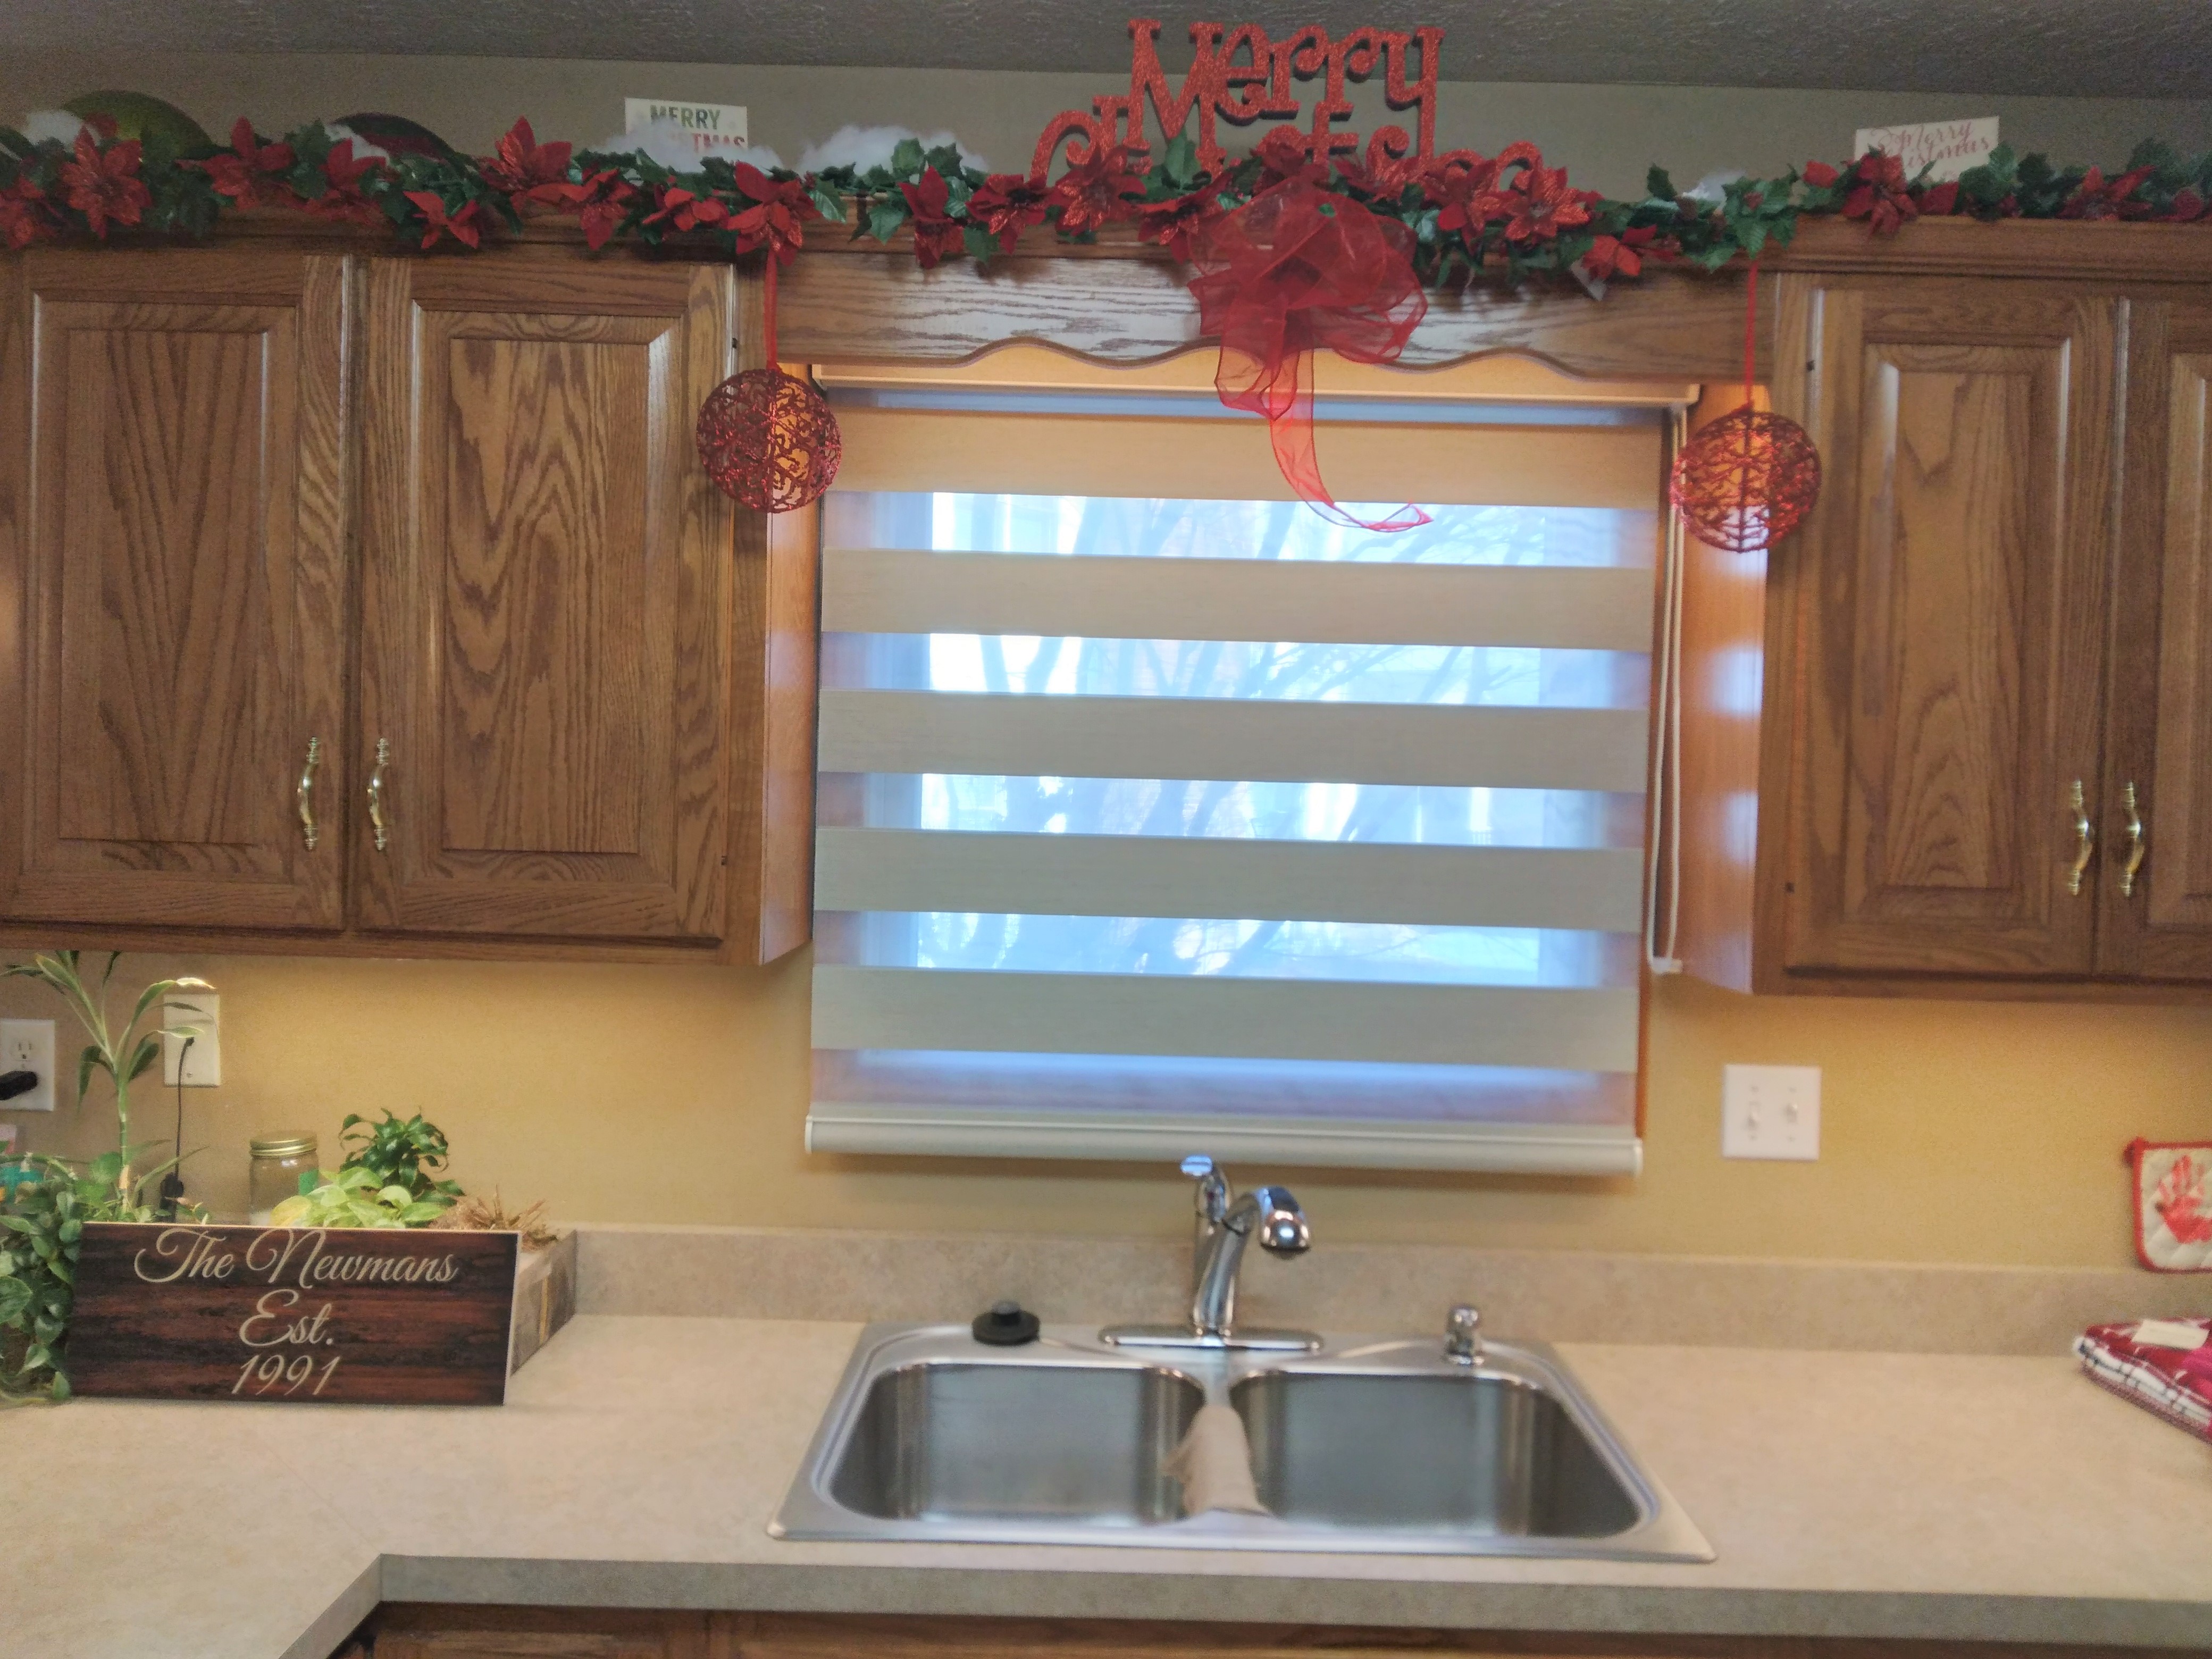 Dual shades/zebra shades in Springfield Illinois kitchen.   BudgetBlinds  WindowCoverings  Shades